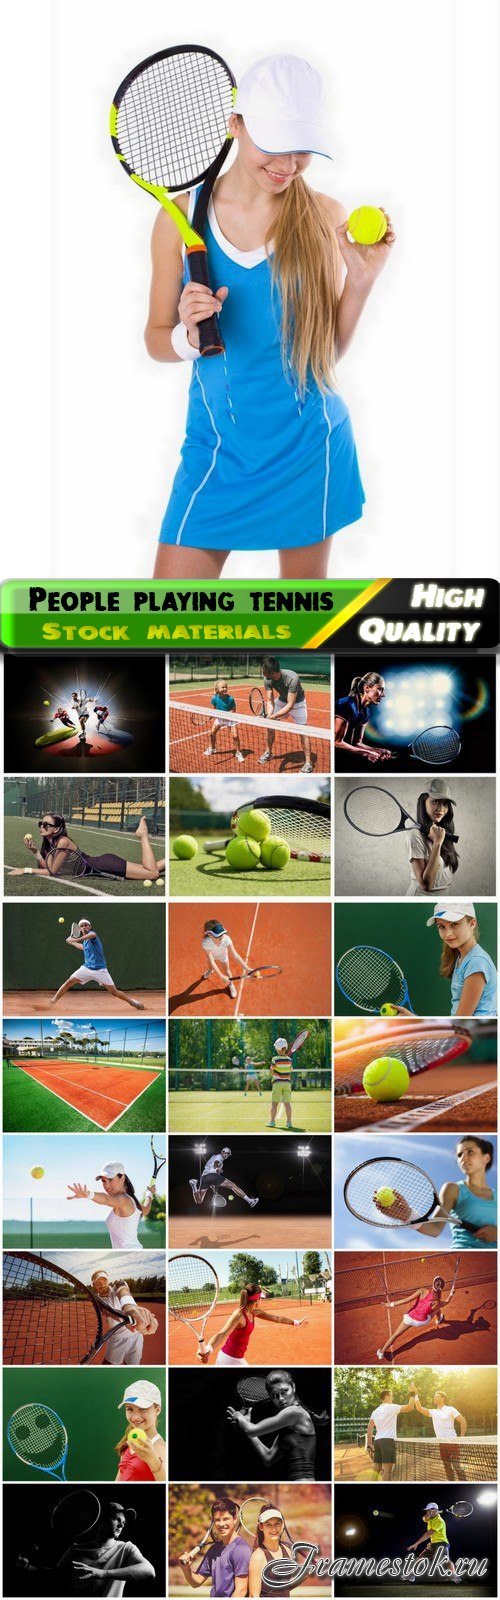 People playing tennis on the field with tennis rackets - 25 HQ Jpg